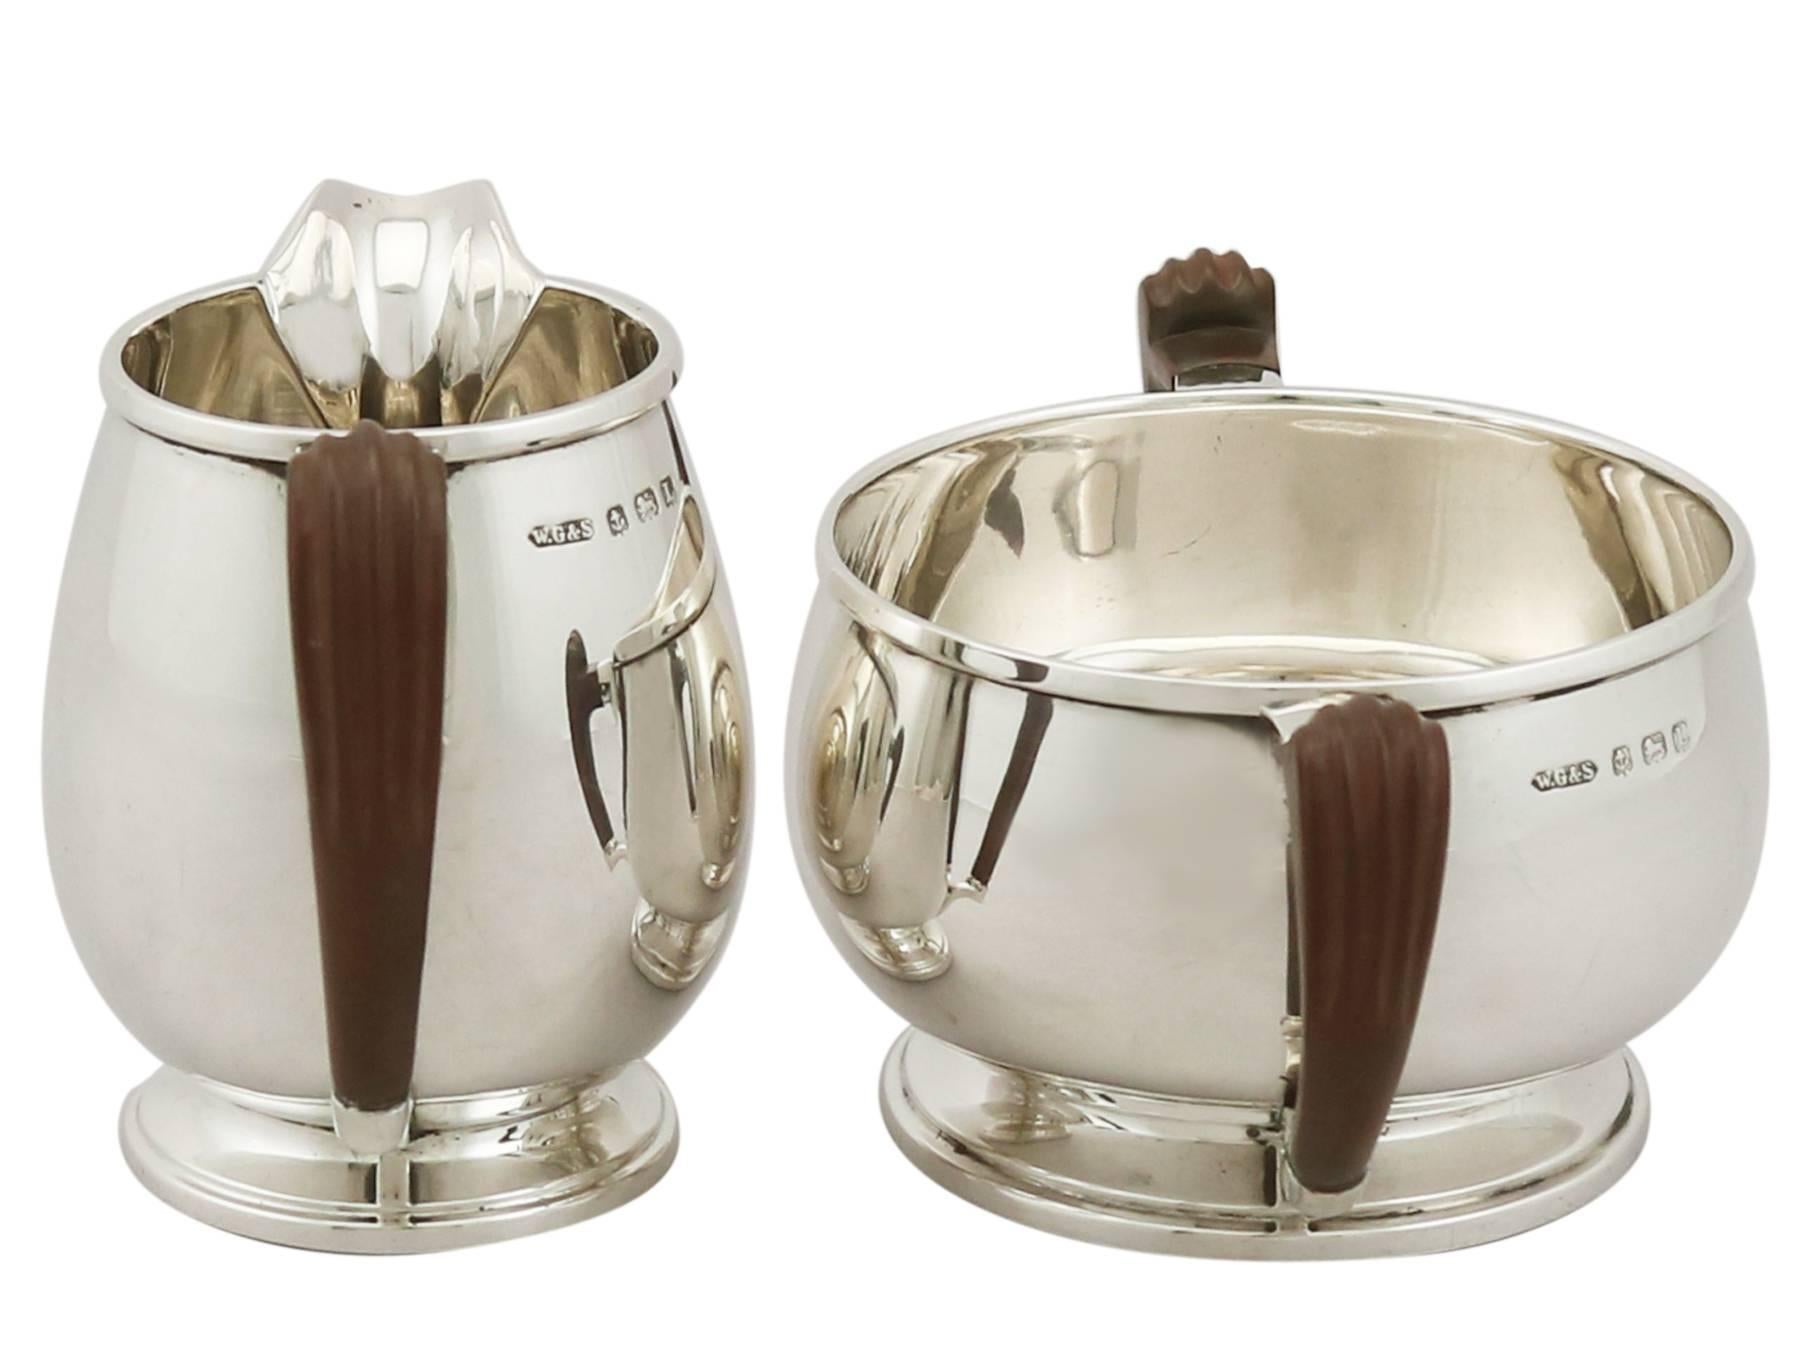 A fine and impressive antique George V English sterling silver cream jug and sugar bowl set in the Art Deco style, an addition to our silver teaware collection.

This exceptional antique George V English sterling silver cream and sugar have a